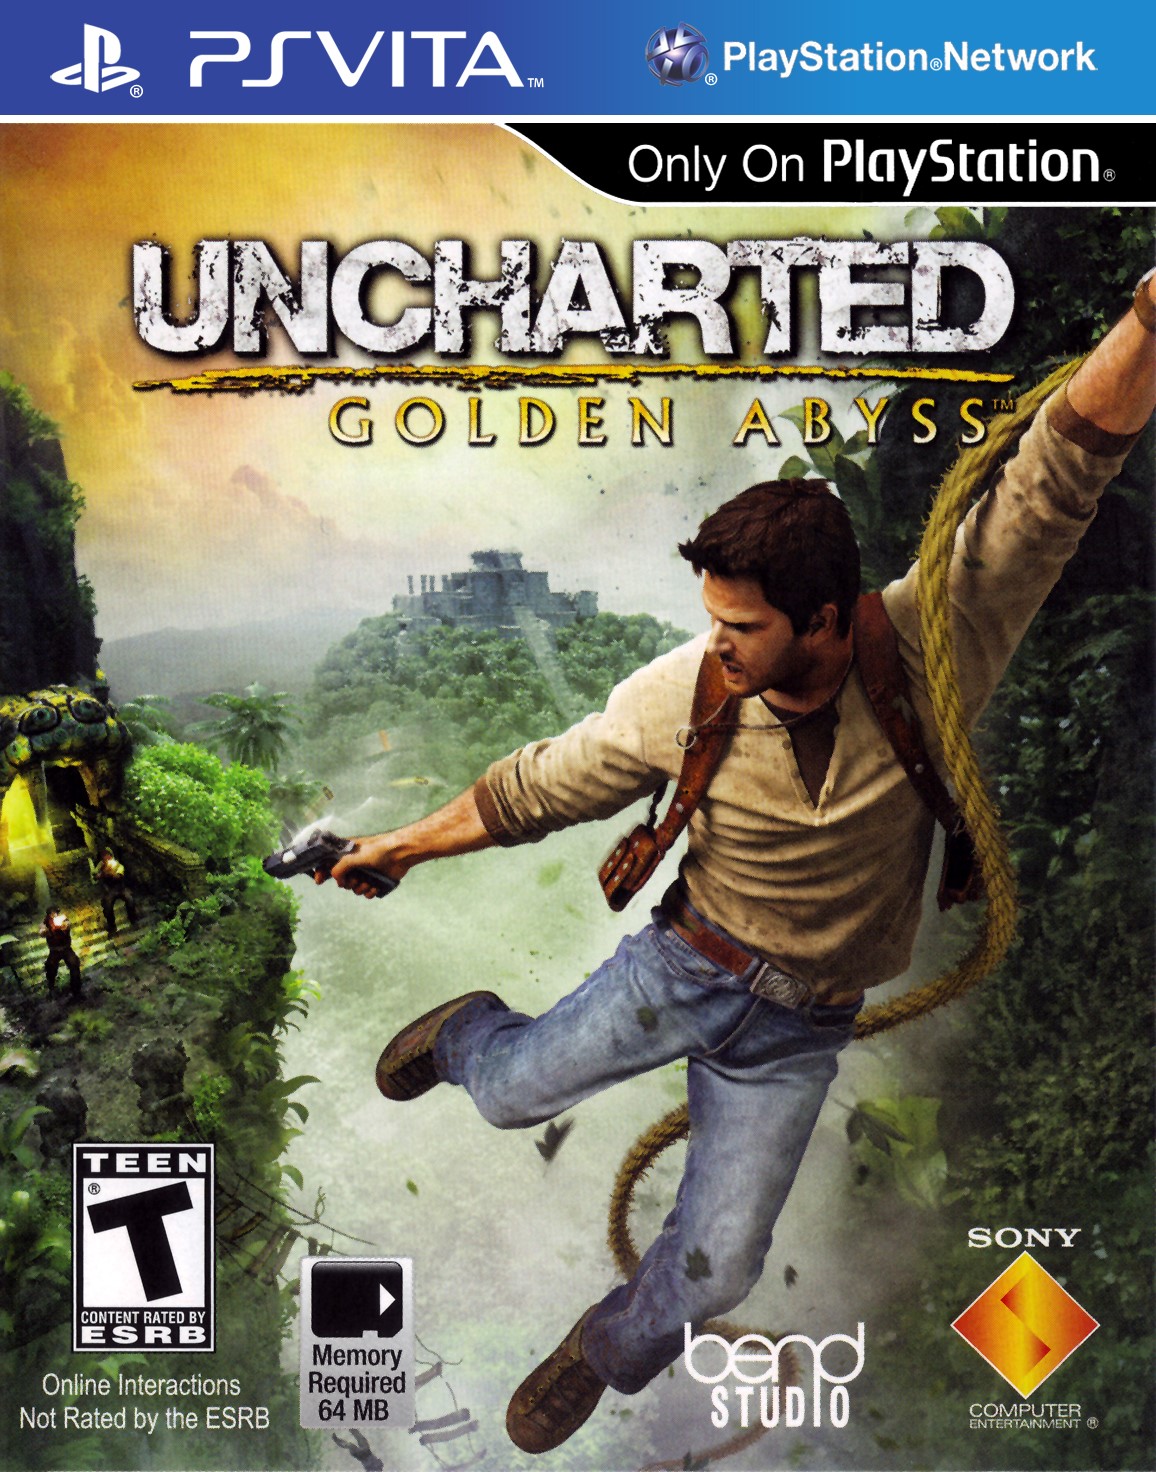 'Uncharted: Golden Abyss'